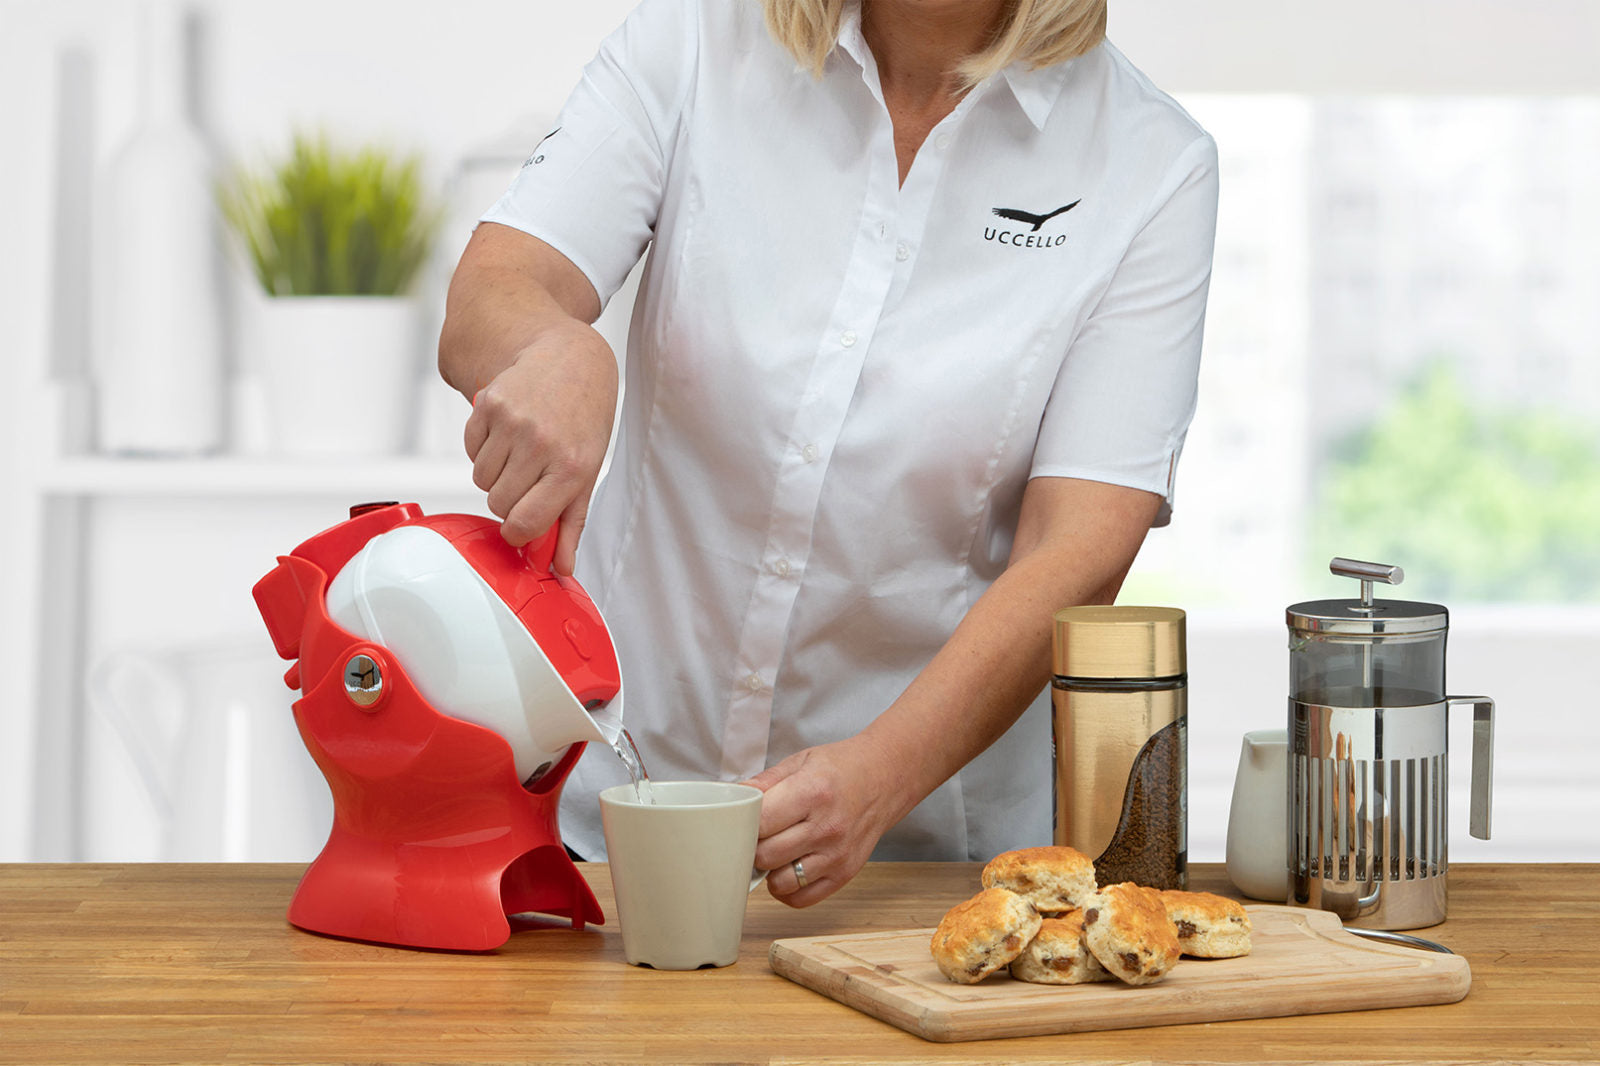 Uccello Kettle – Effortless Pouring. Ergonomic Disability Tipping Aid